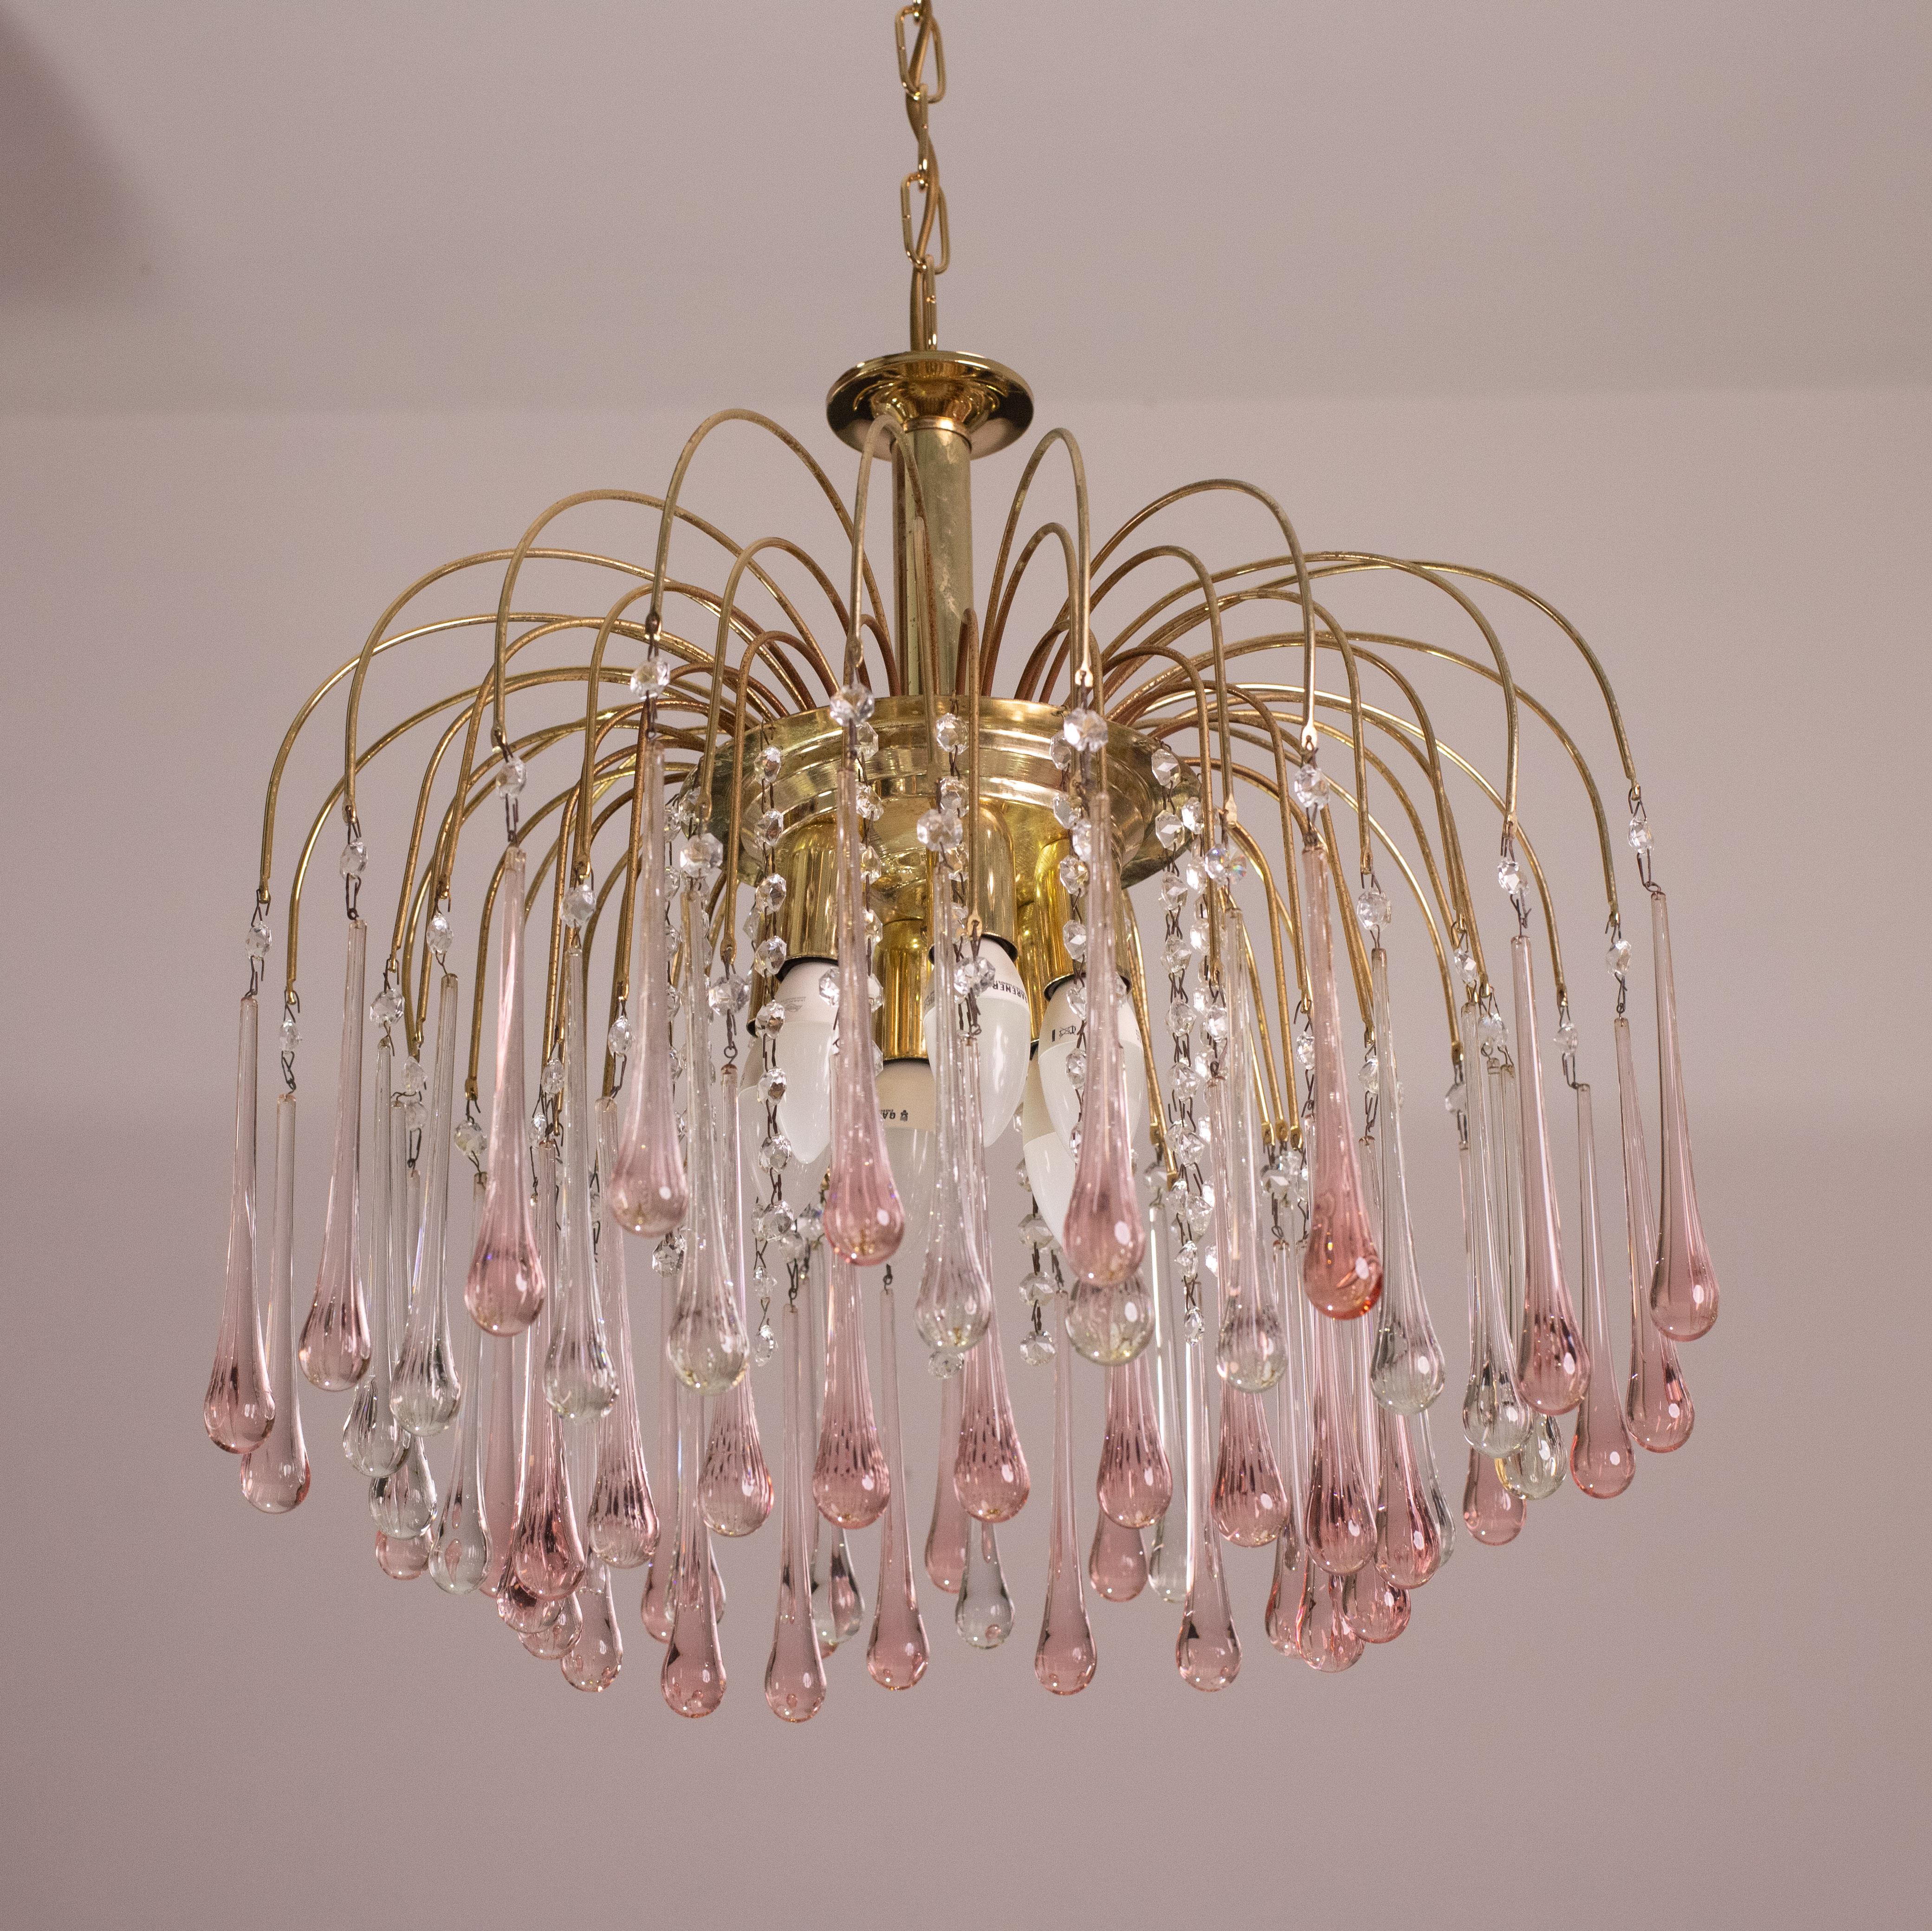 Murano Glass Lady Barbara, Murano Chandelier Pink and White Drops, Venini Style, 1970s For Sale